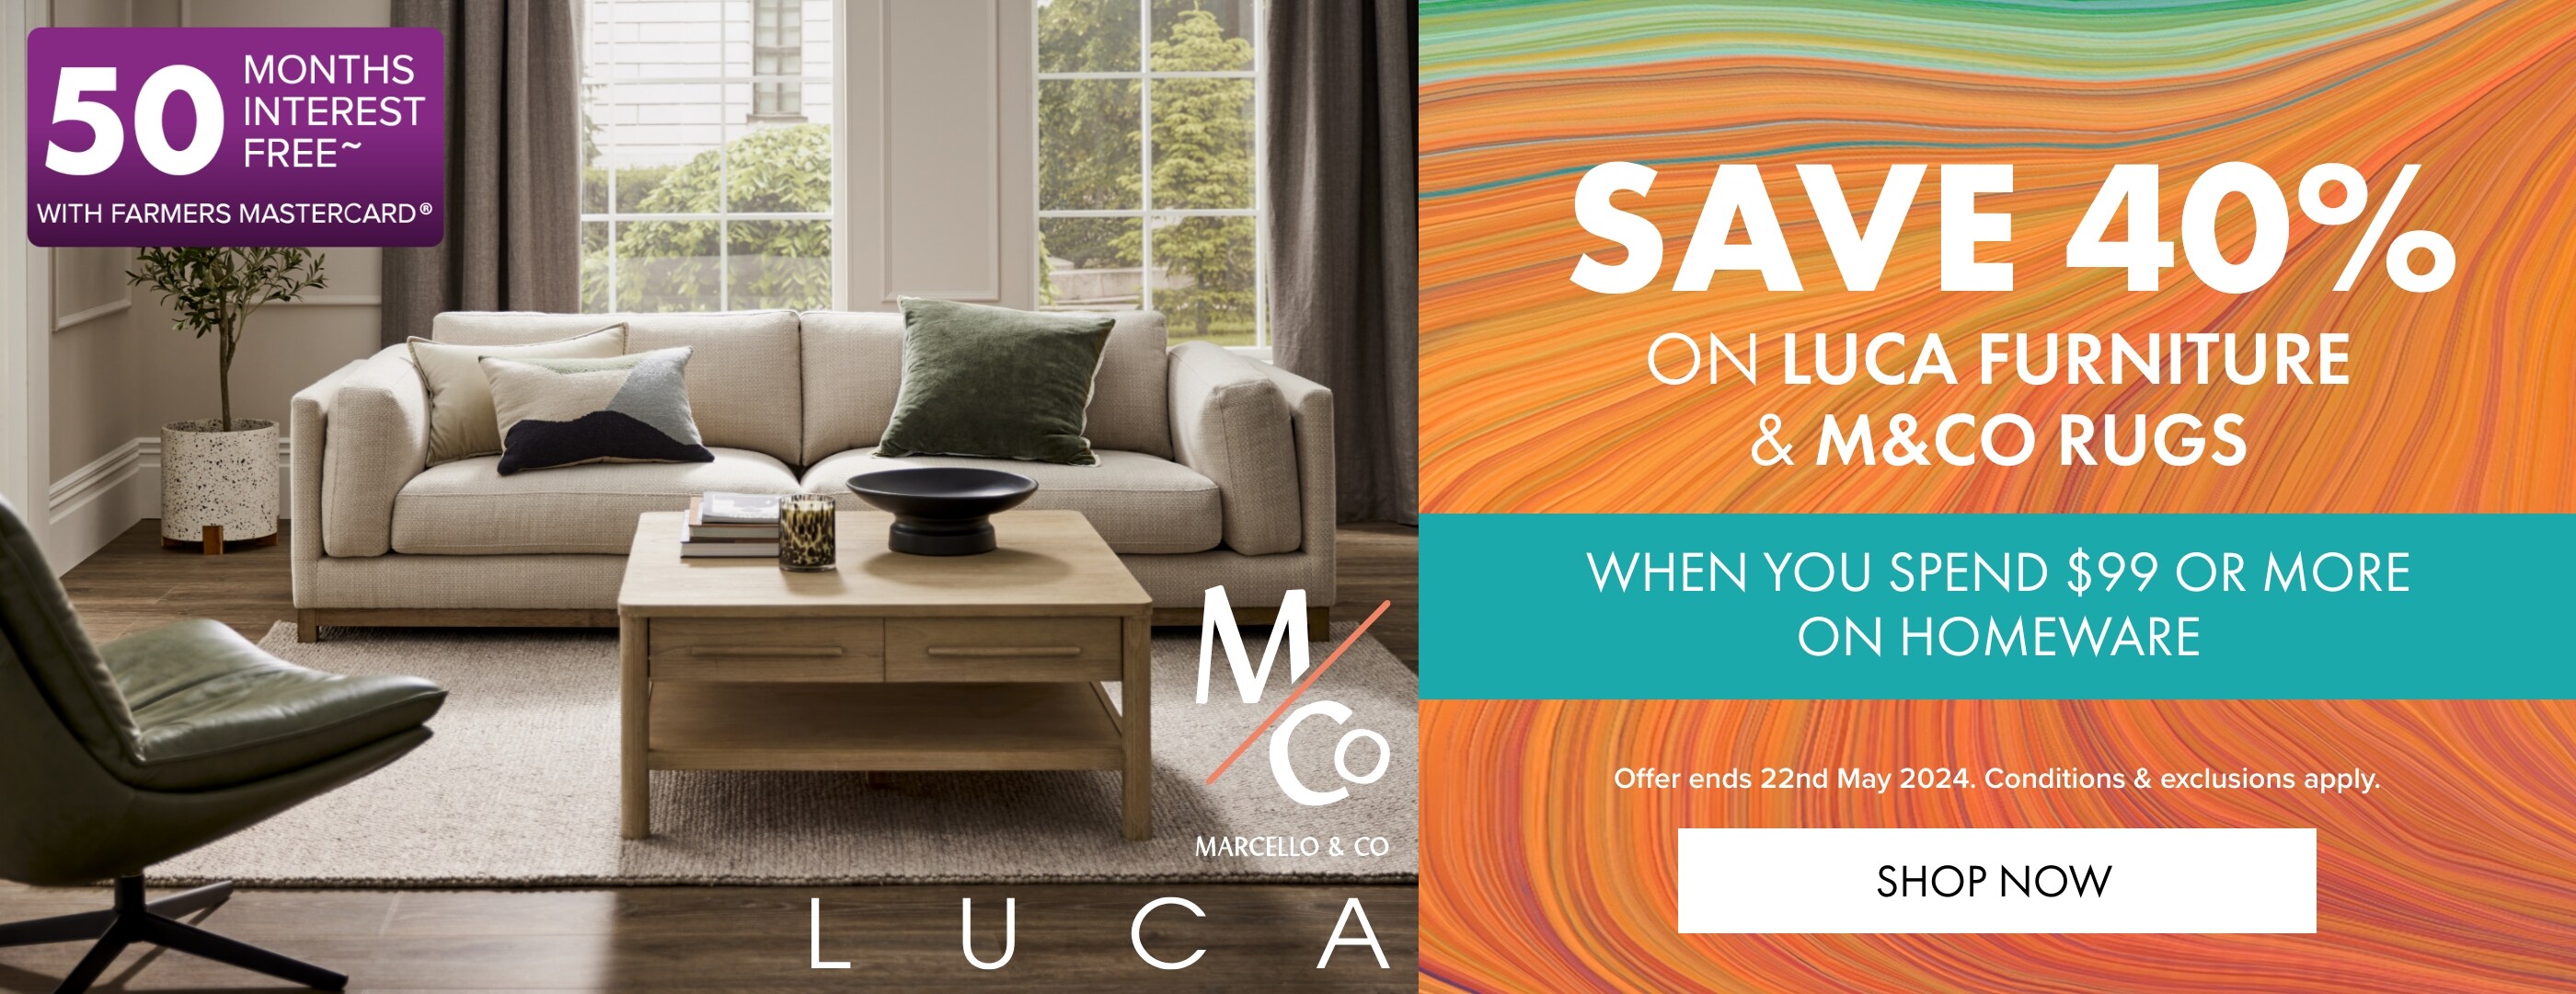 Save 40% on LUCA FURNITURE when you spend $99 or more on Homeware, Beds and Appliances